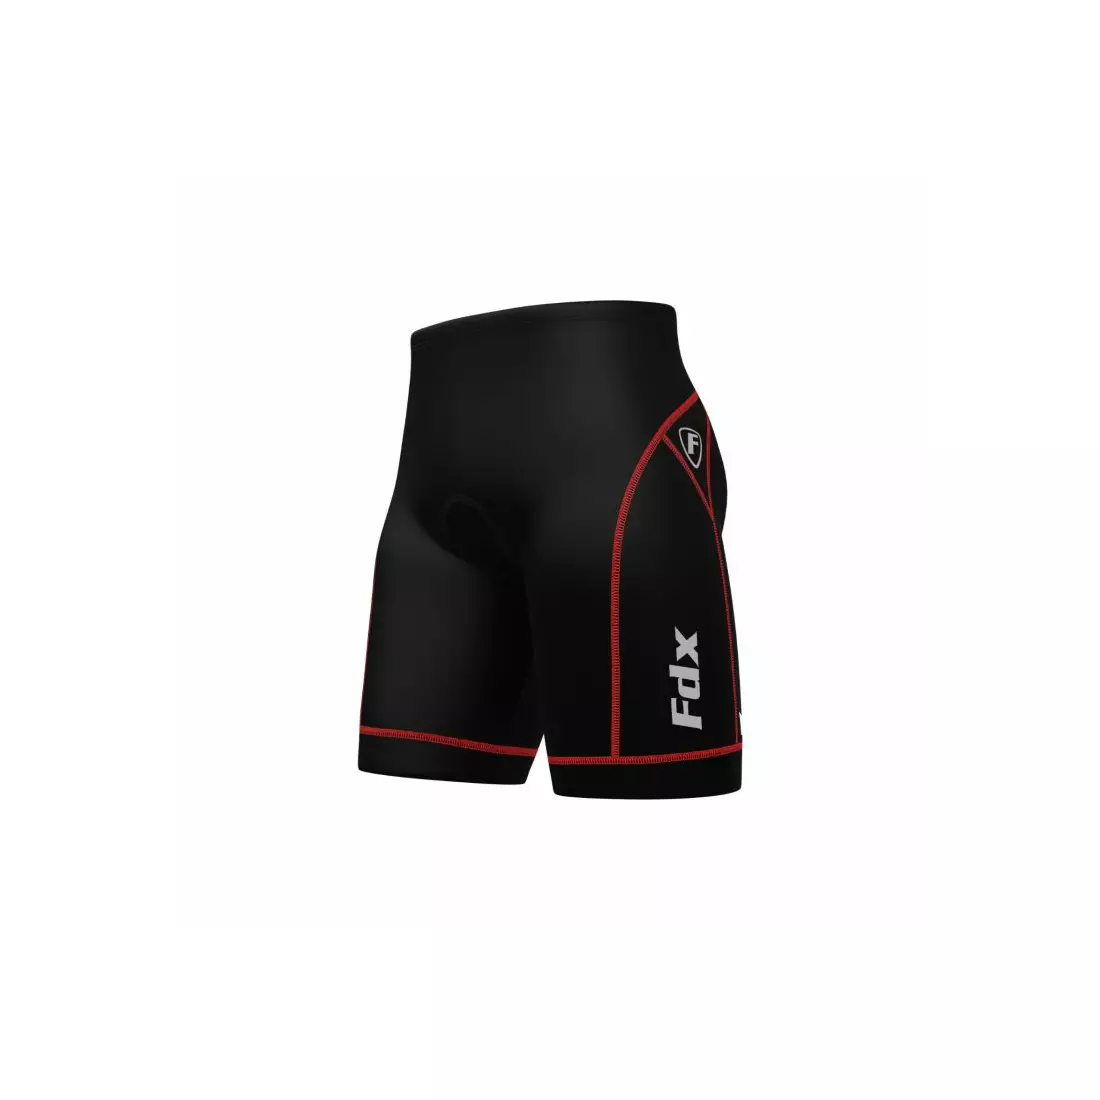 FDX 990 men's bibless cycling shorts, black and red